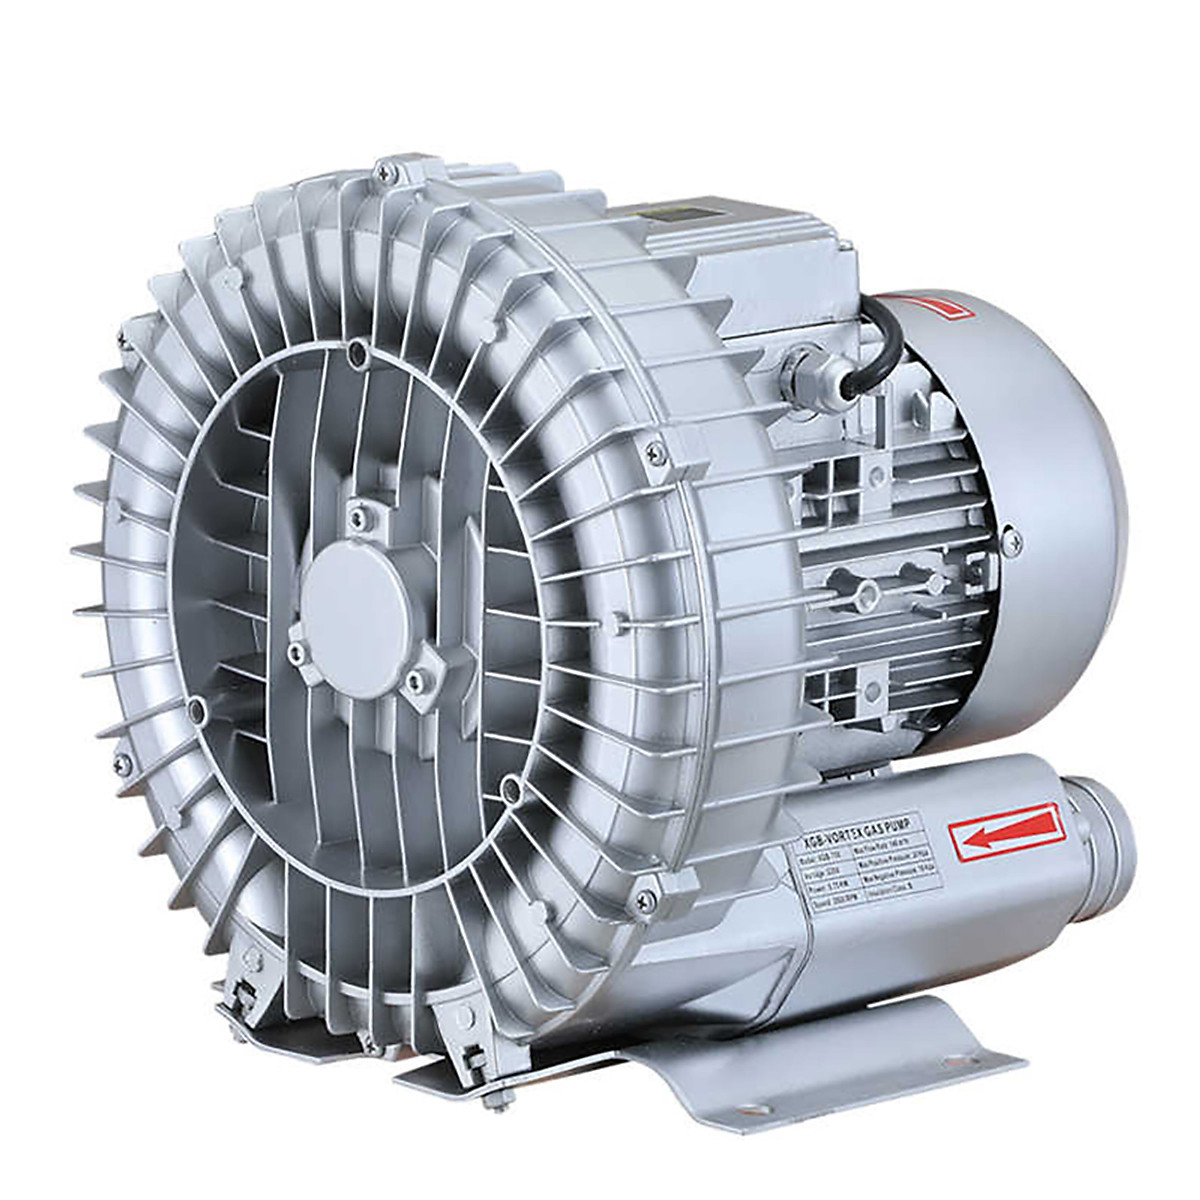 Industrial Fans and Blowers: Enhancing Air Circulation and Ventilation in Manufacturing